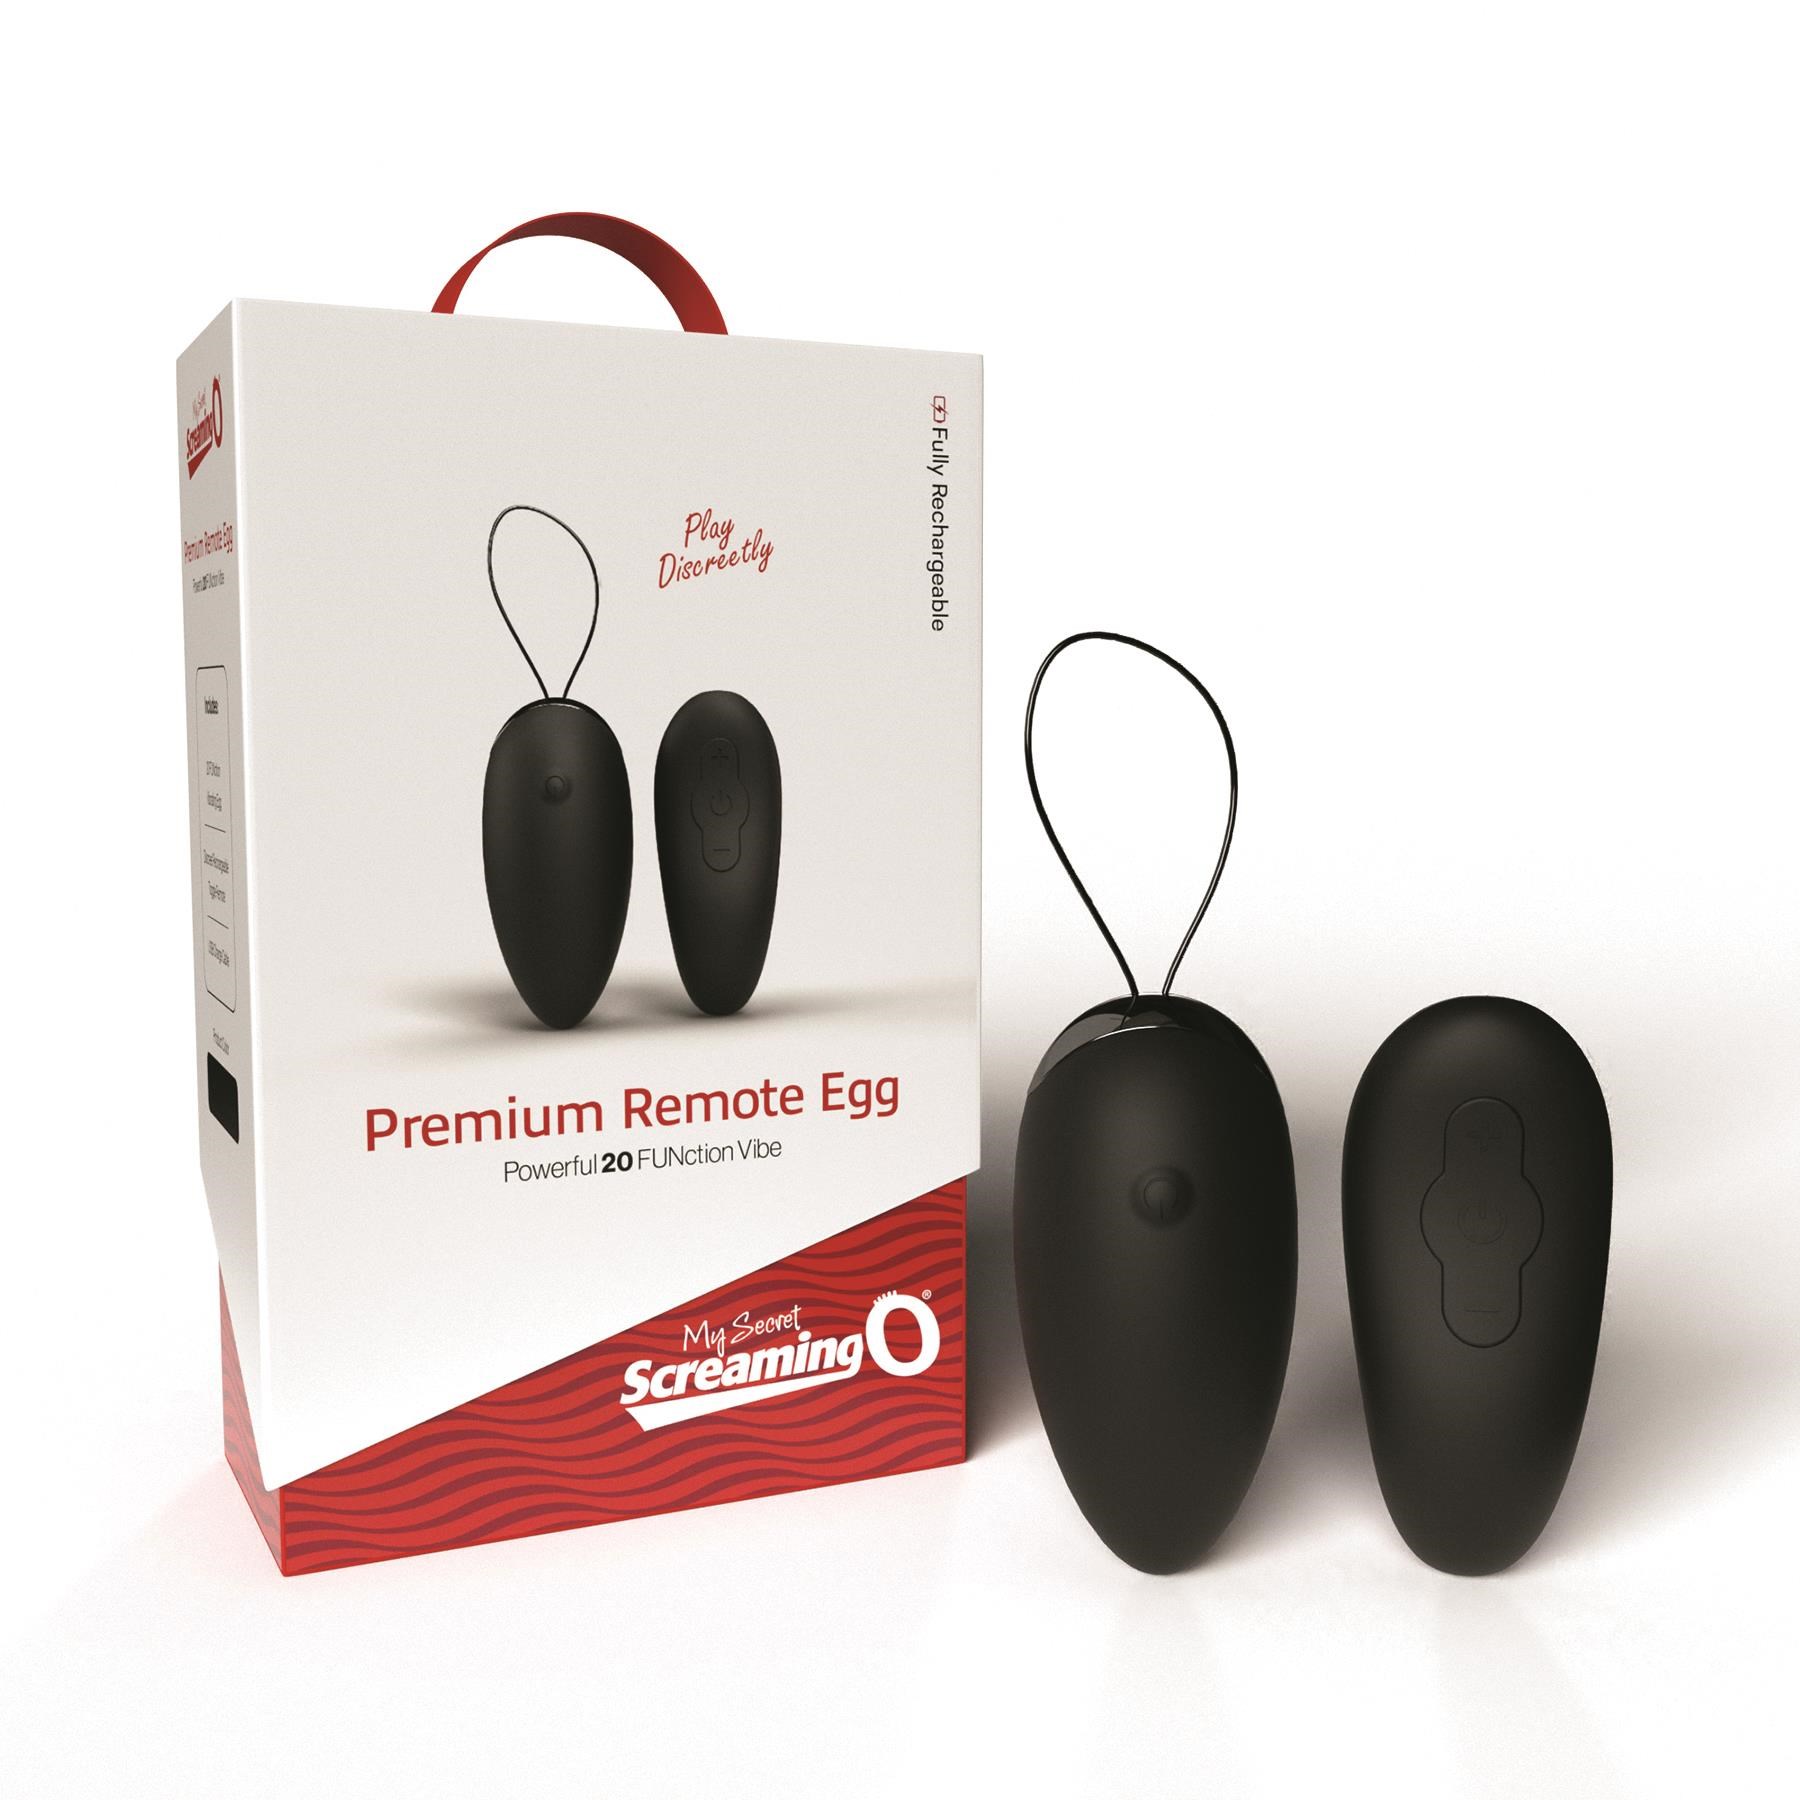 Screaming O Premium Rechargeable Remote Egg - Box and Product